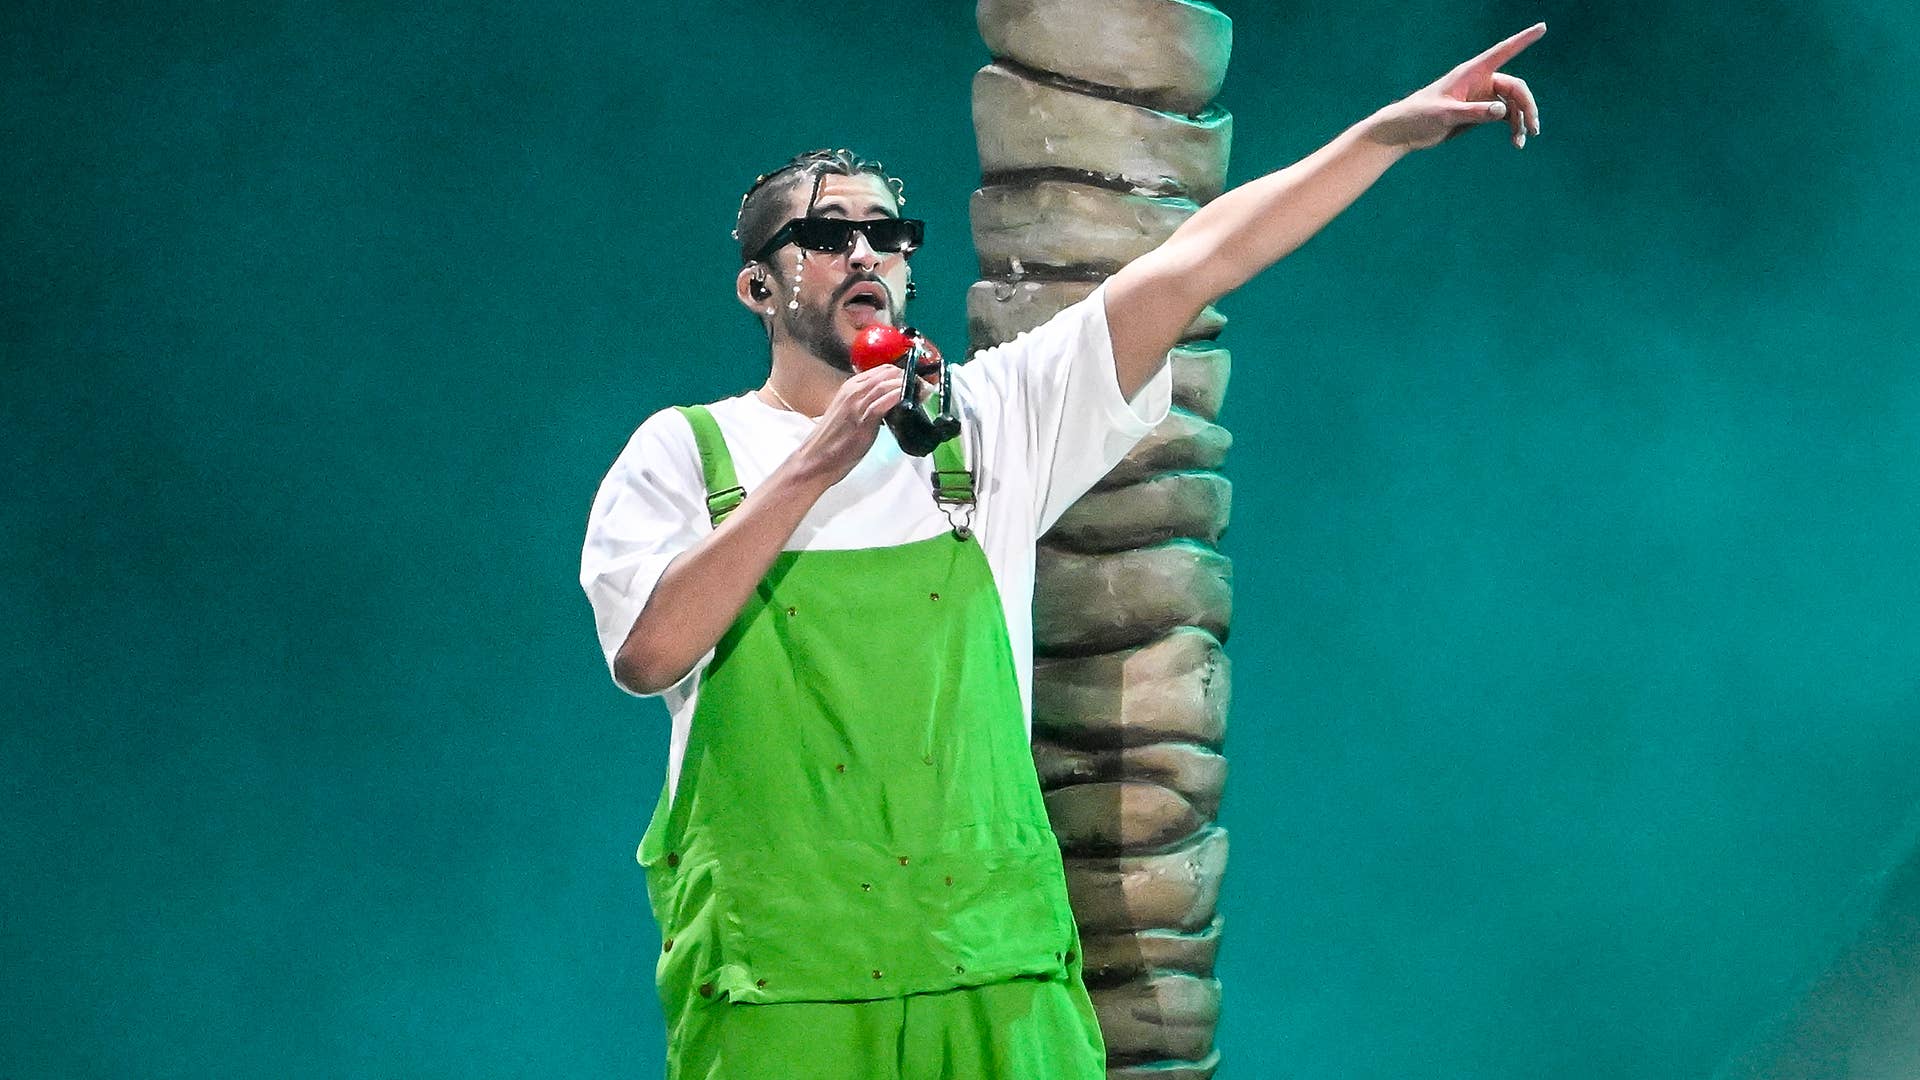 Bad Bunny performs at RingCentral Coliseum